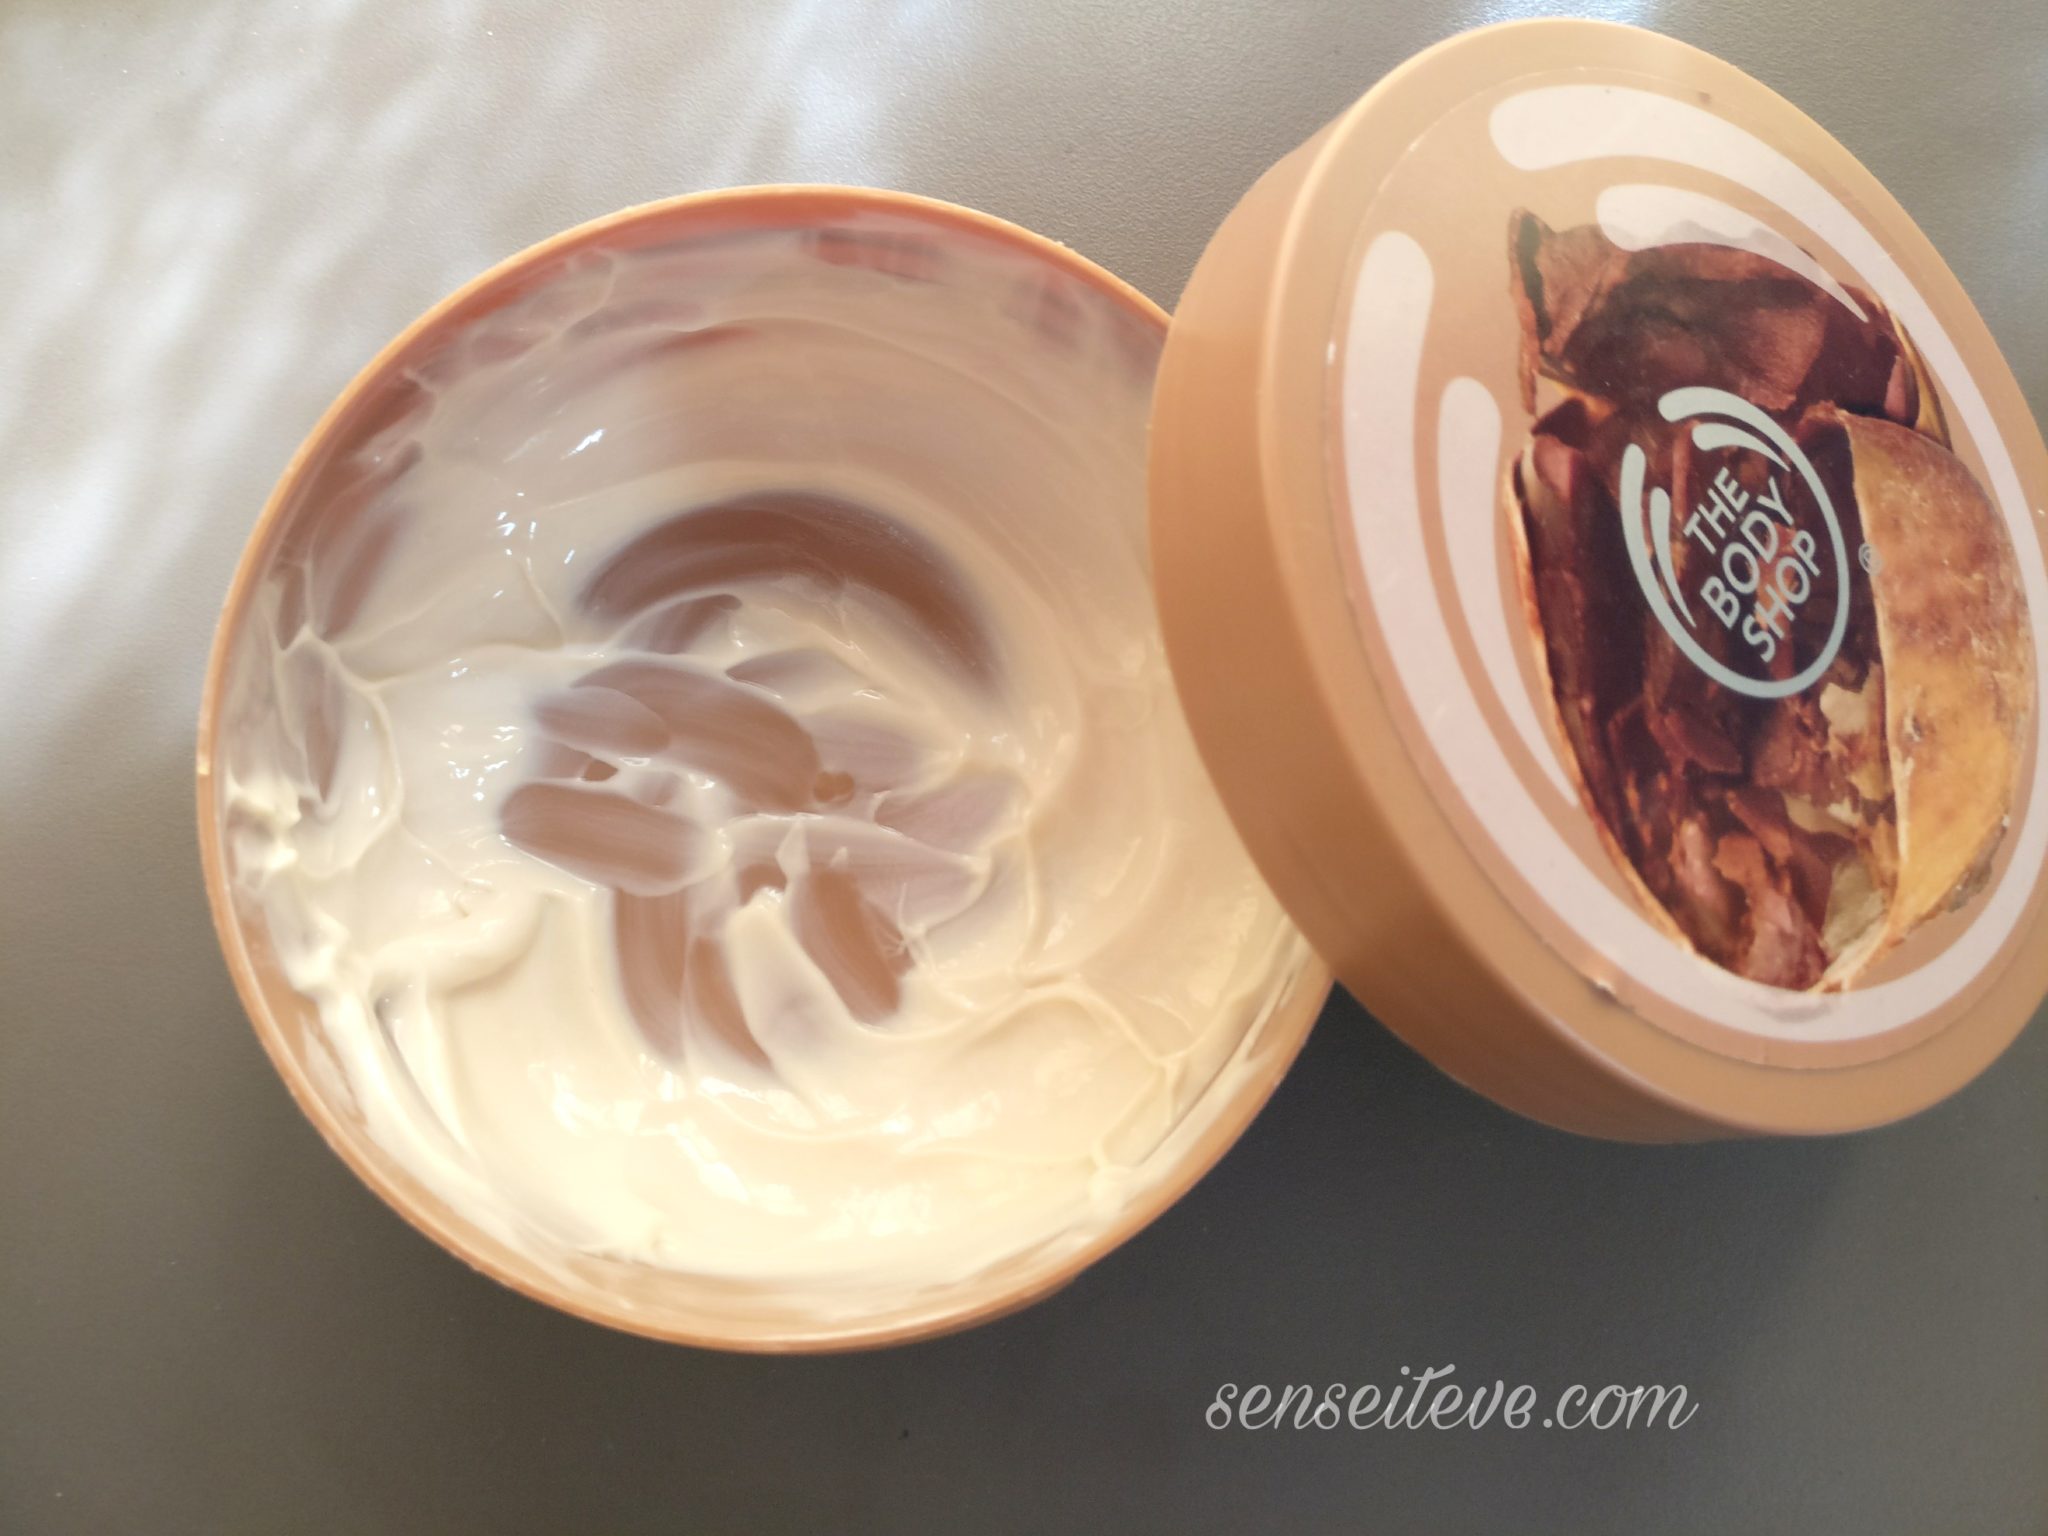 The Body Shop Cocoa Butter Body Butter Review Sense It Eve The Body Shop Cocoa Butter Body Butter Review